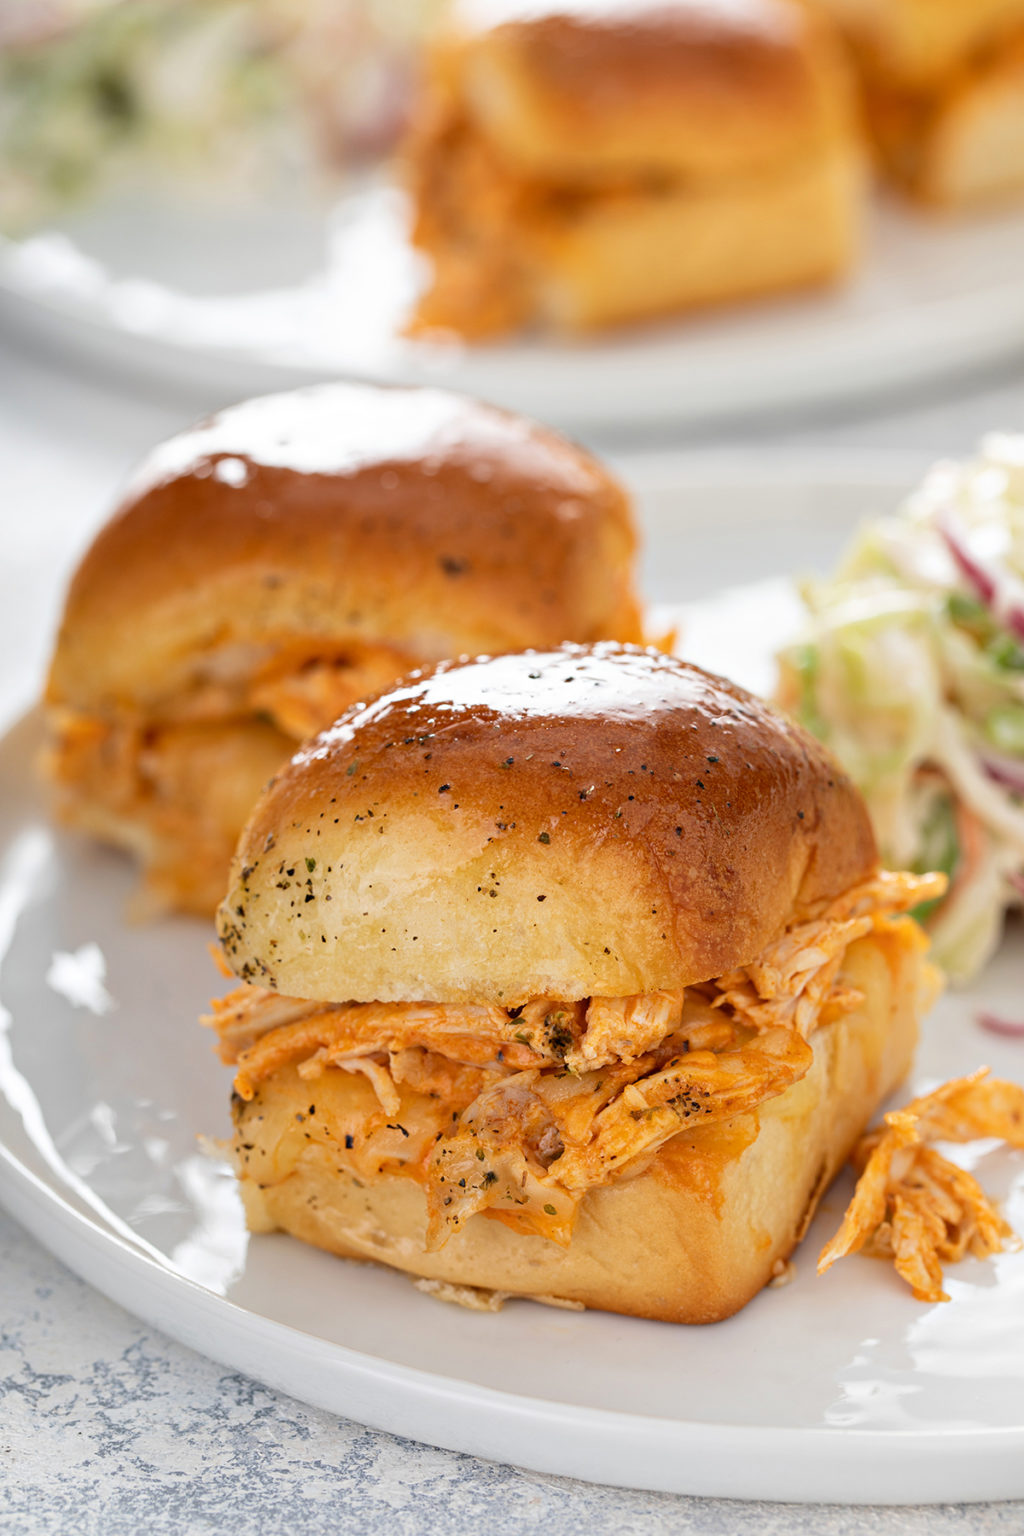 Sandwiches with Buffalo Chicken